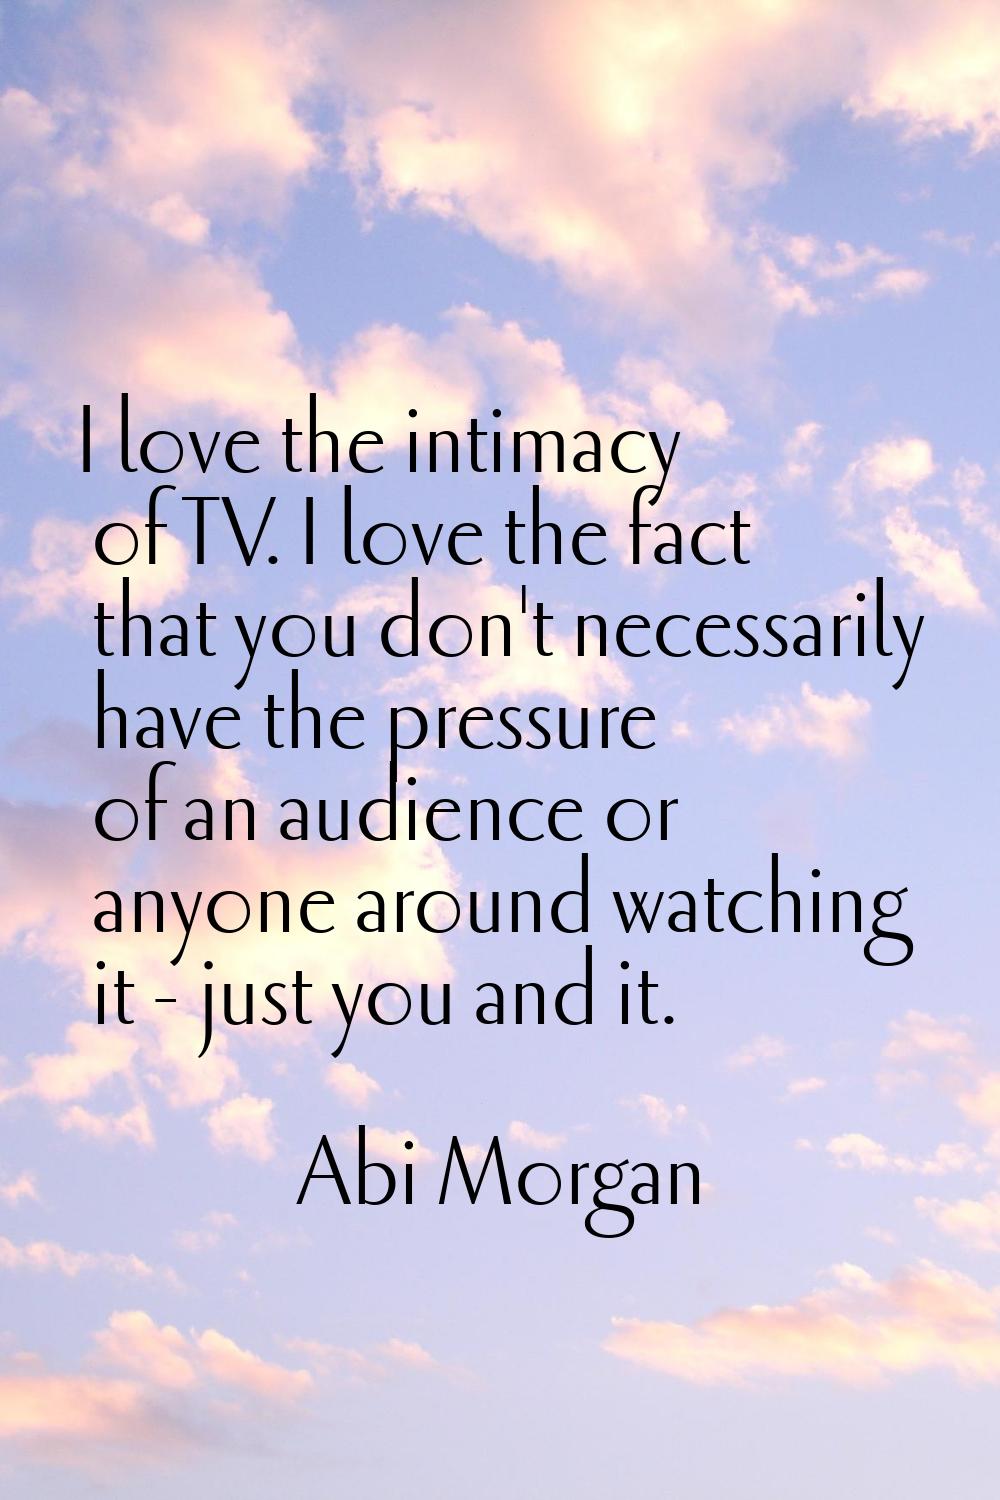 I love the intimacy of TV. I love the fact that you don't necessarily have the pressure of an audie